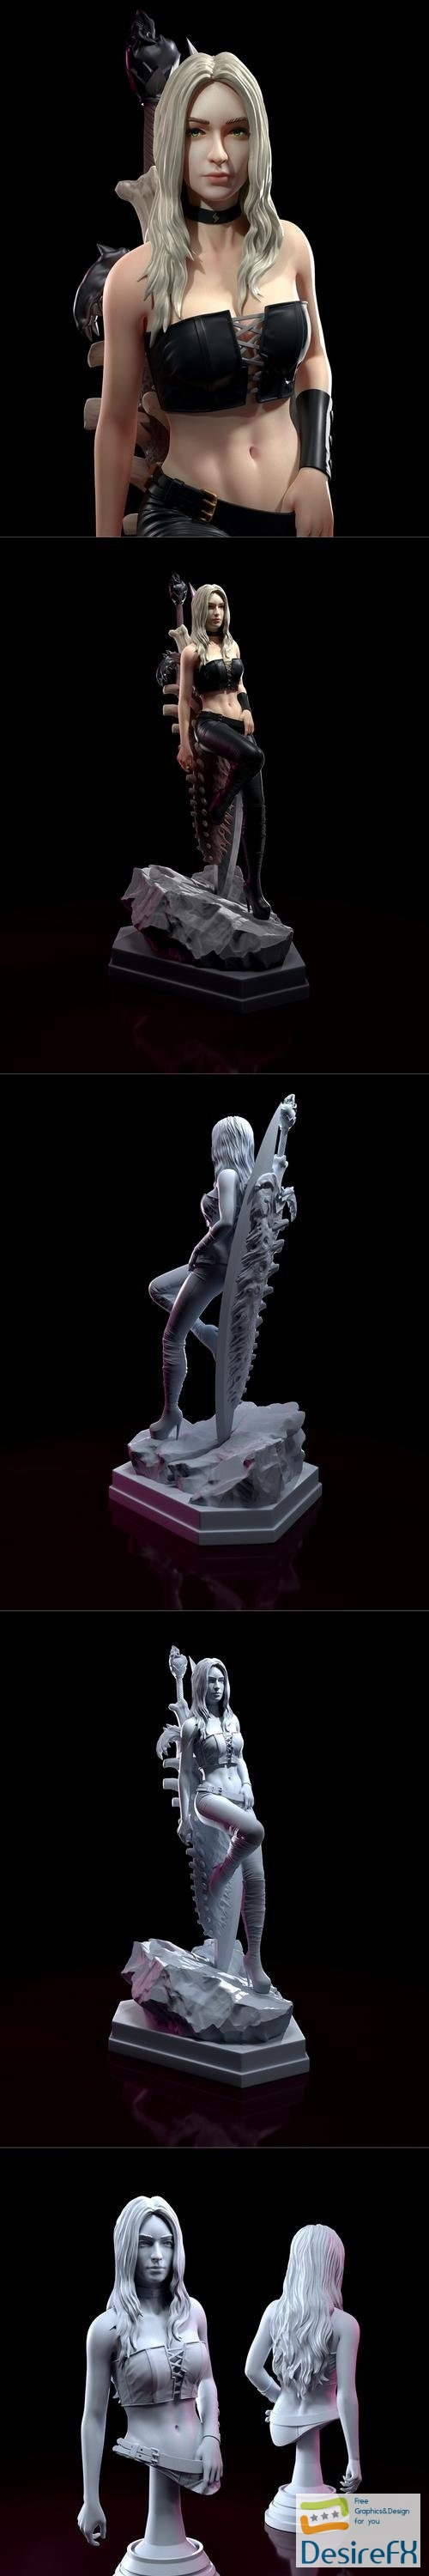 H3LL Creator - Trish Devil May Cry 4 and bust – 3D Print